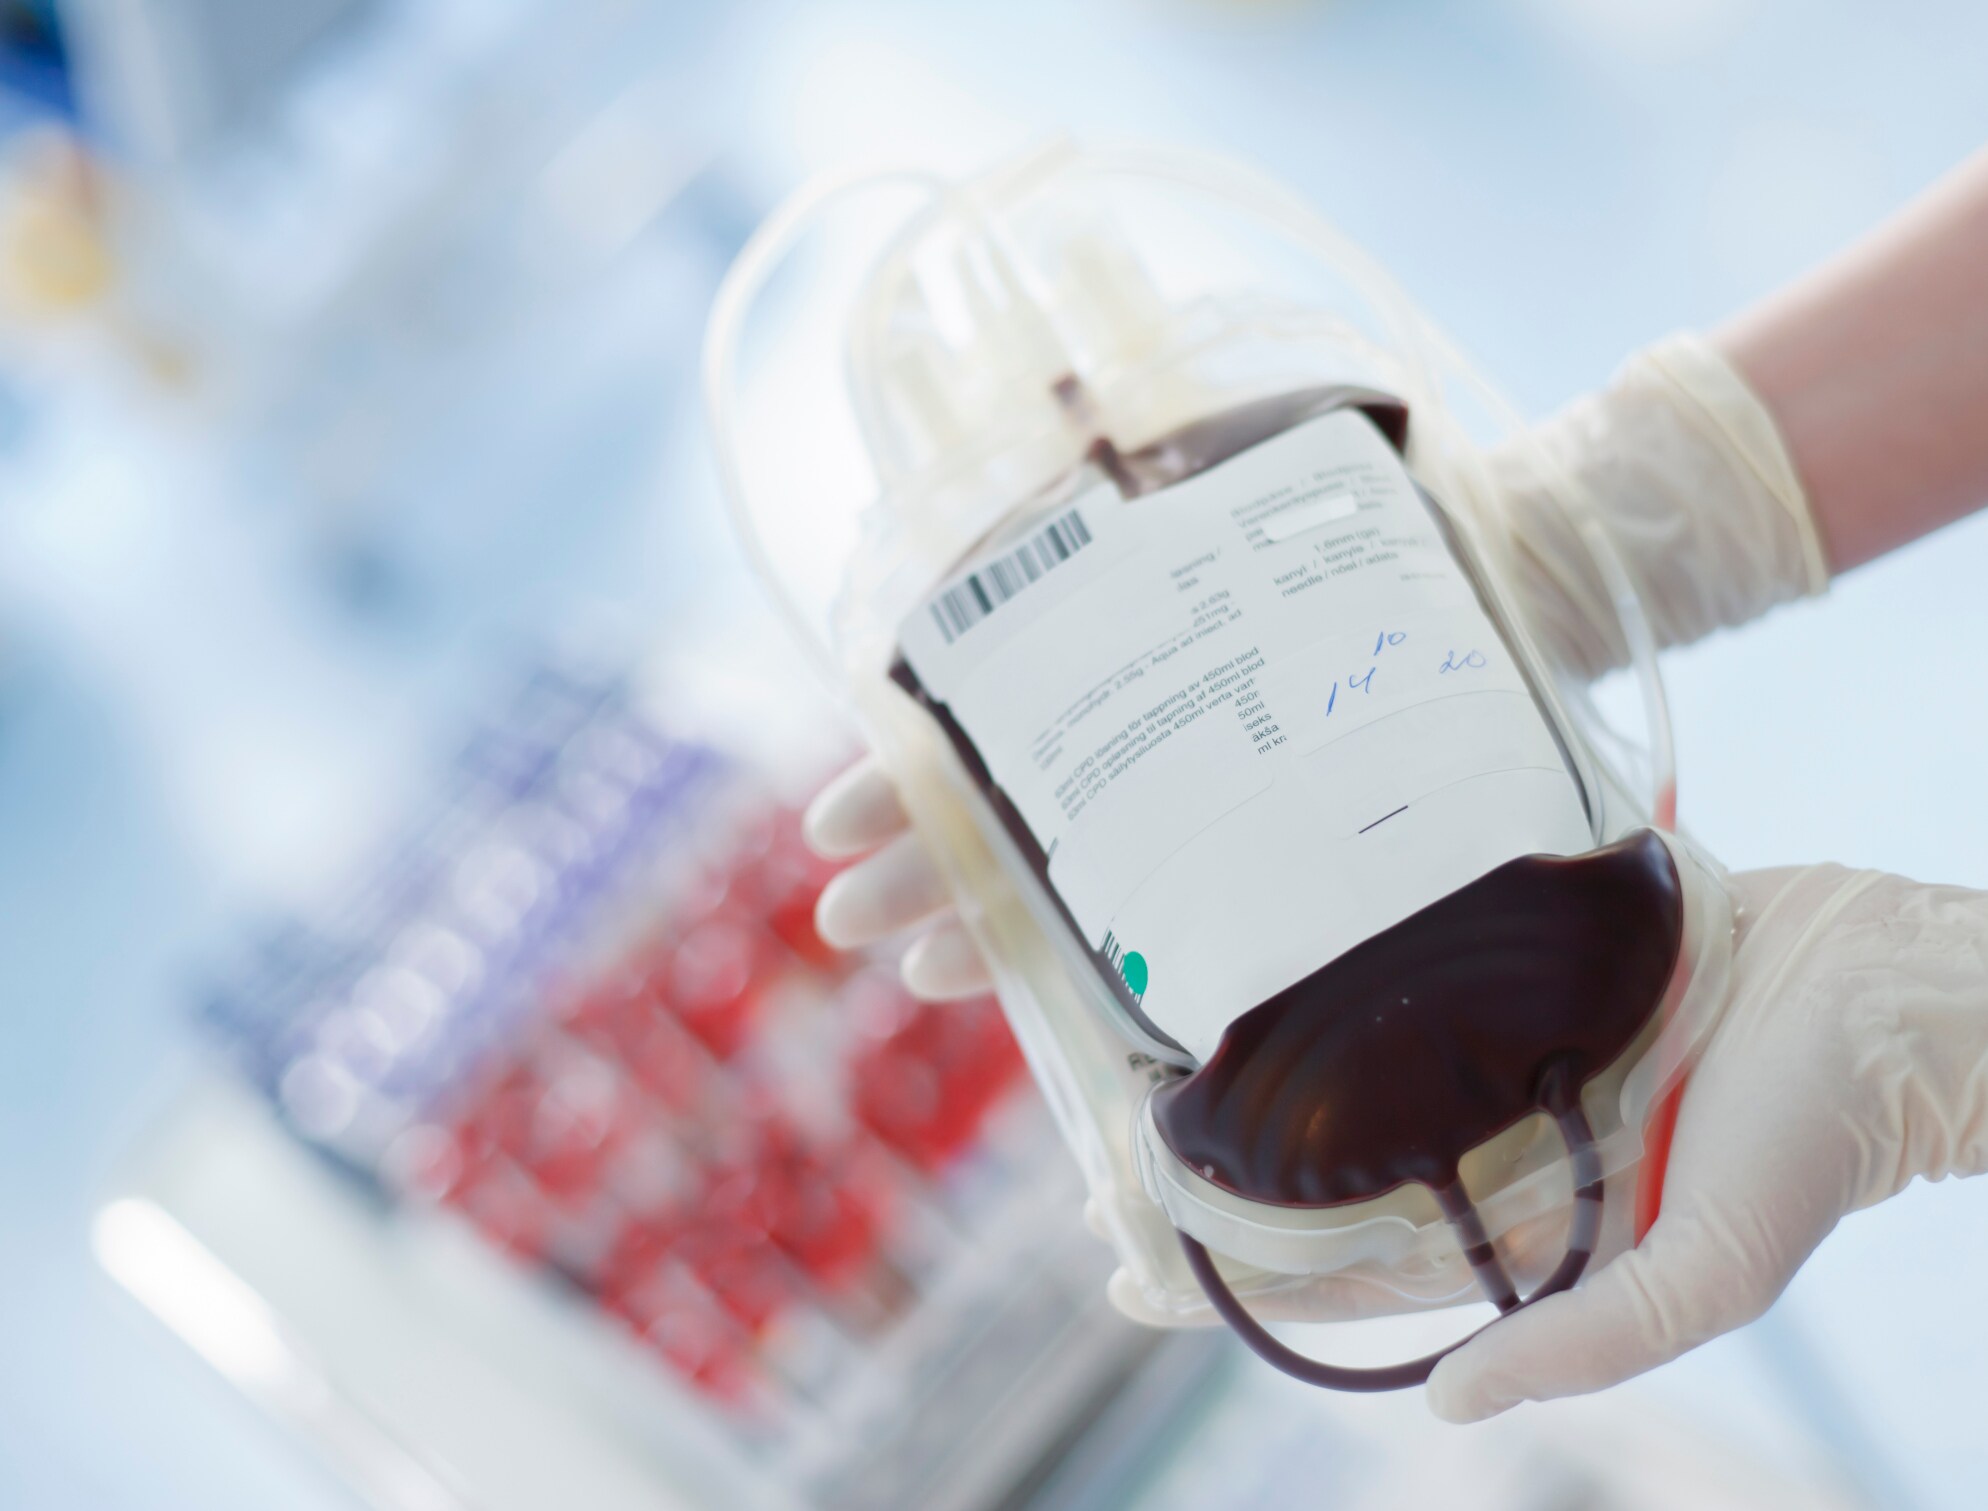 Greater Care Needed Over Transfusions in Sickle Cell Disease